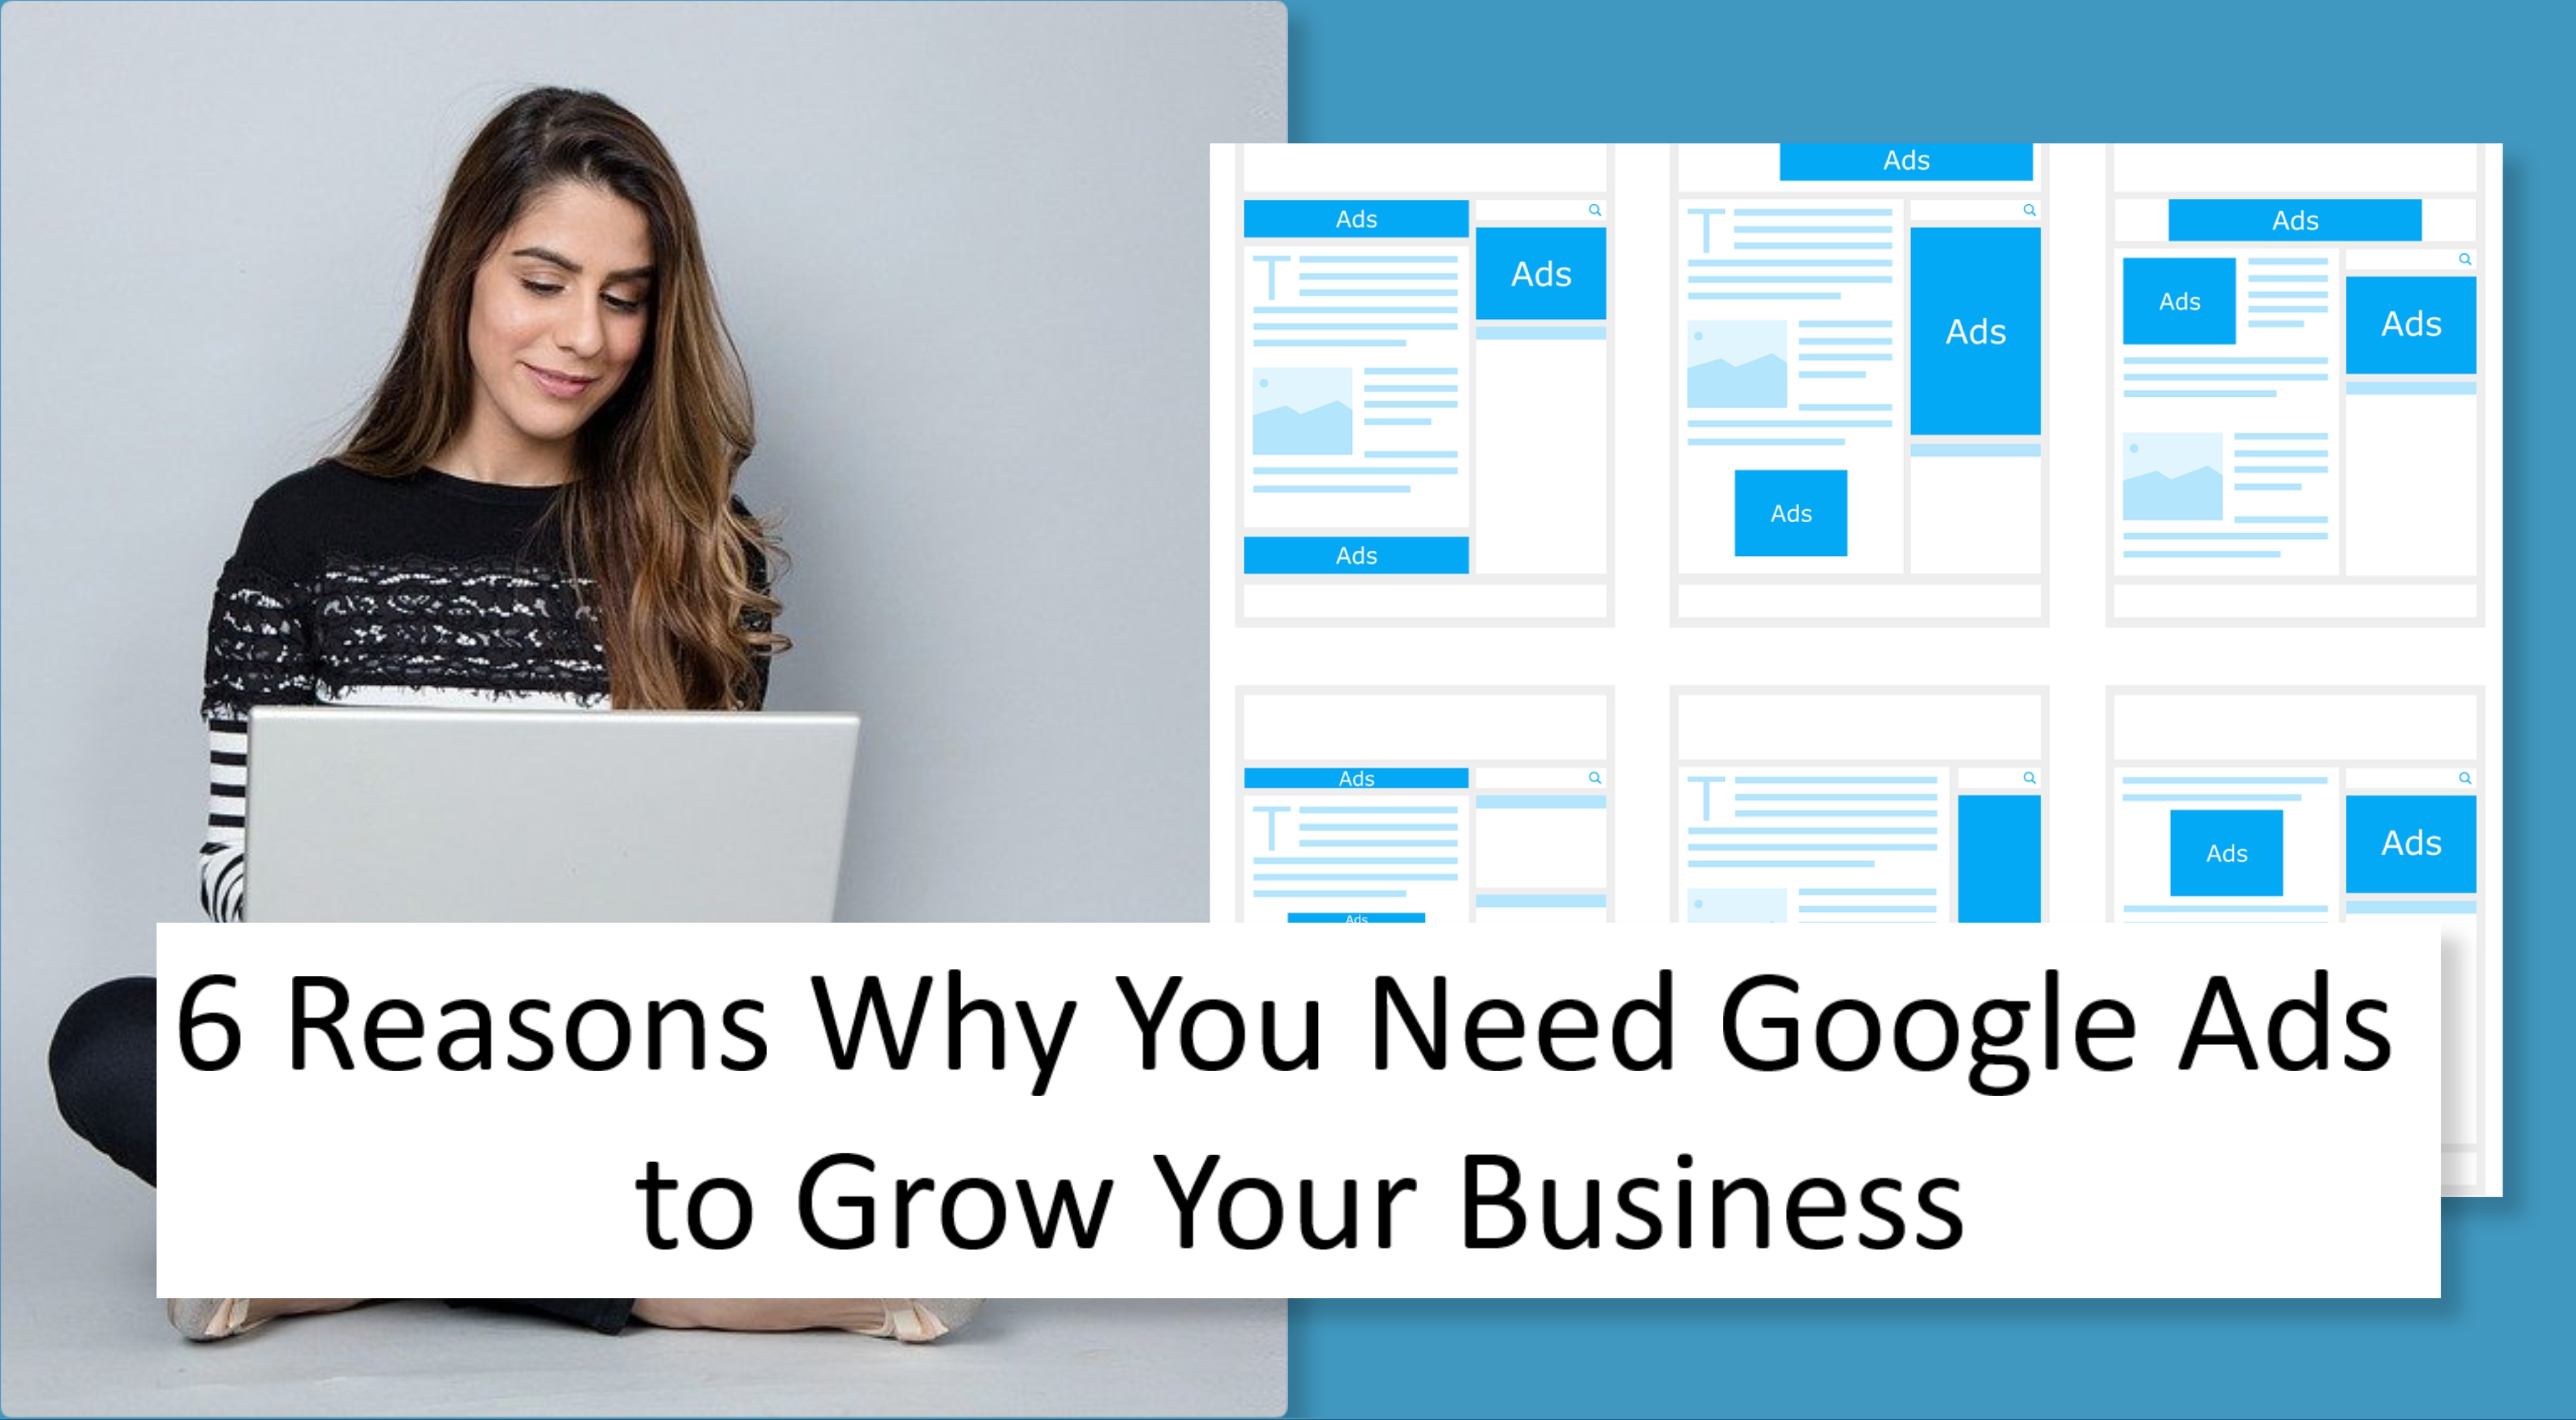 6 Reasons Why You Need Google Ads To Grow Your Business